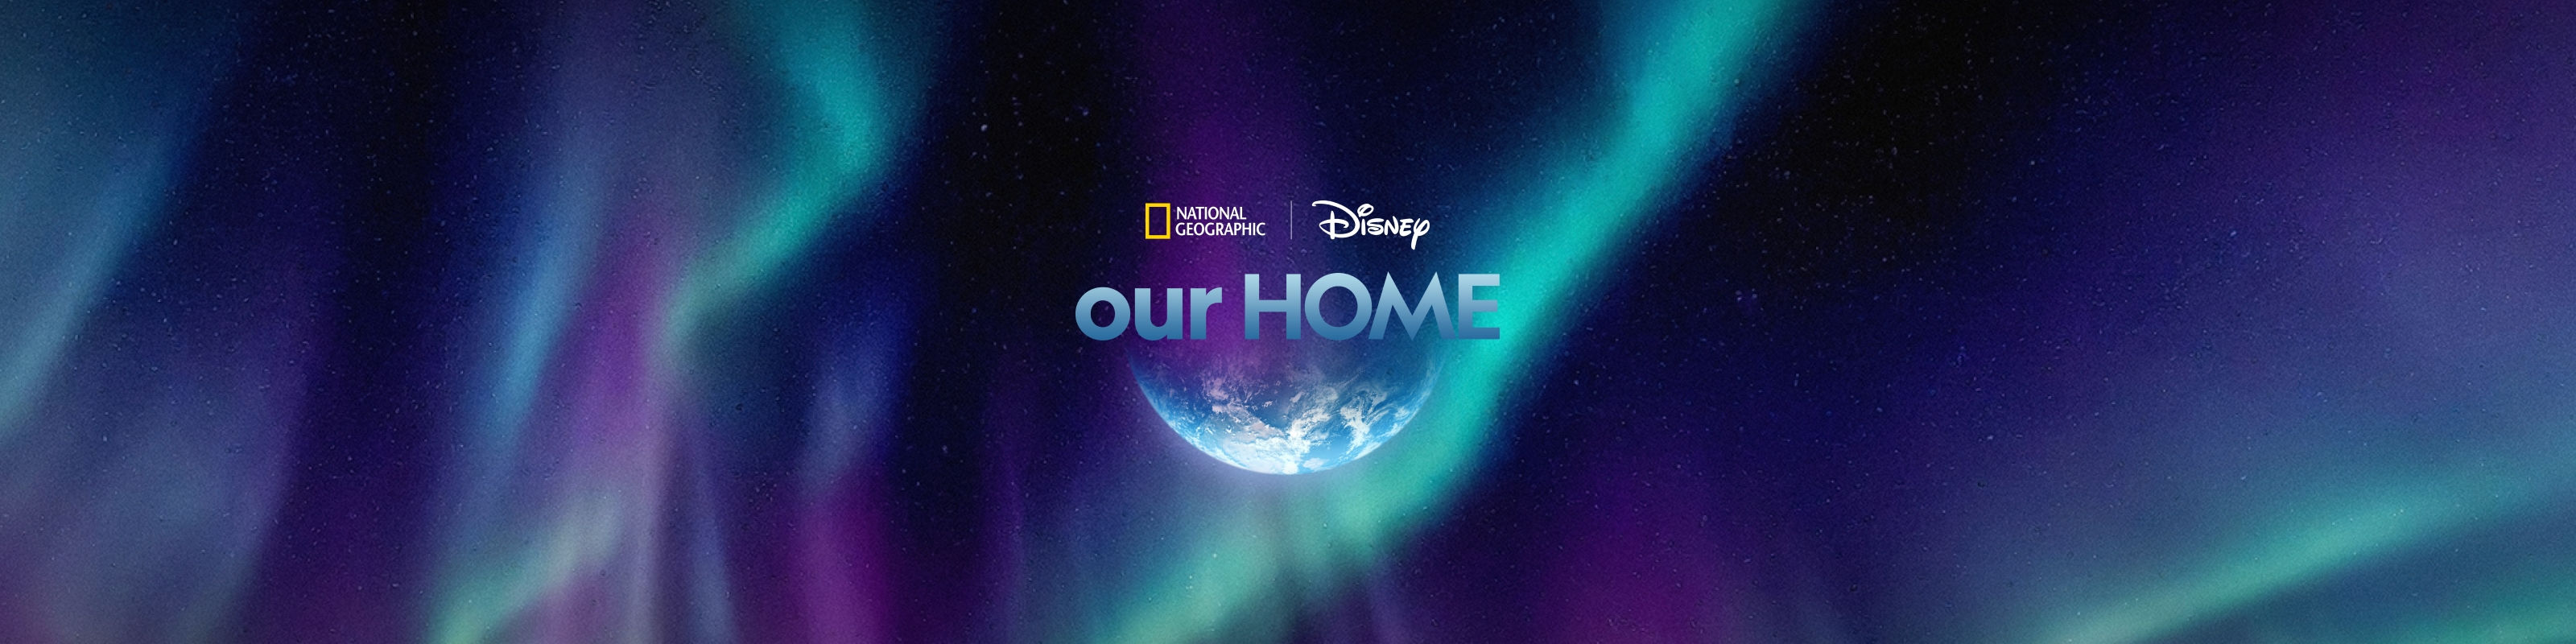 Ourhome banner